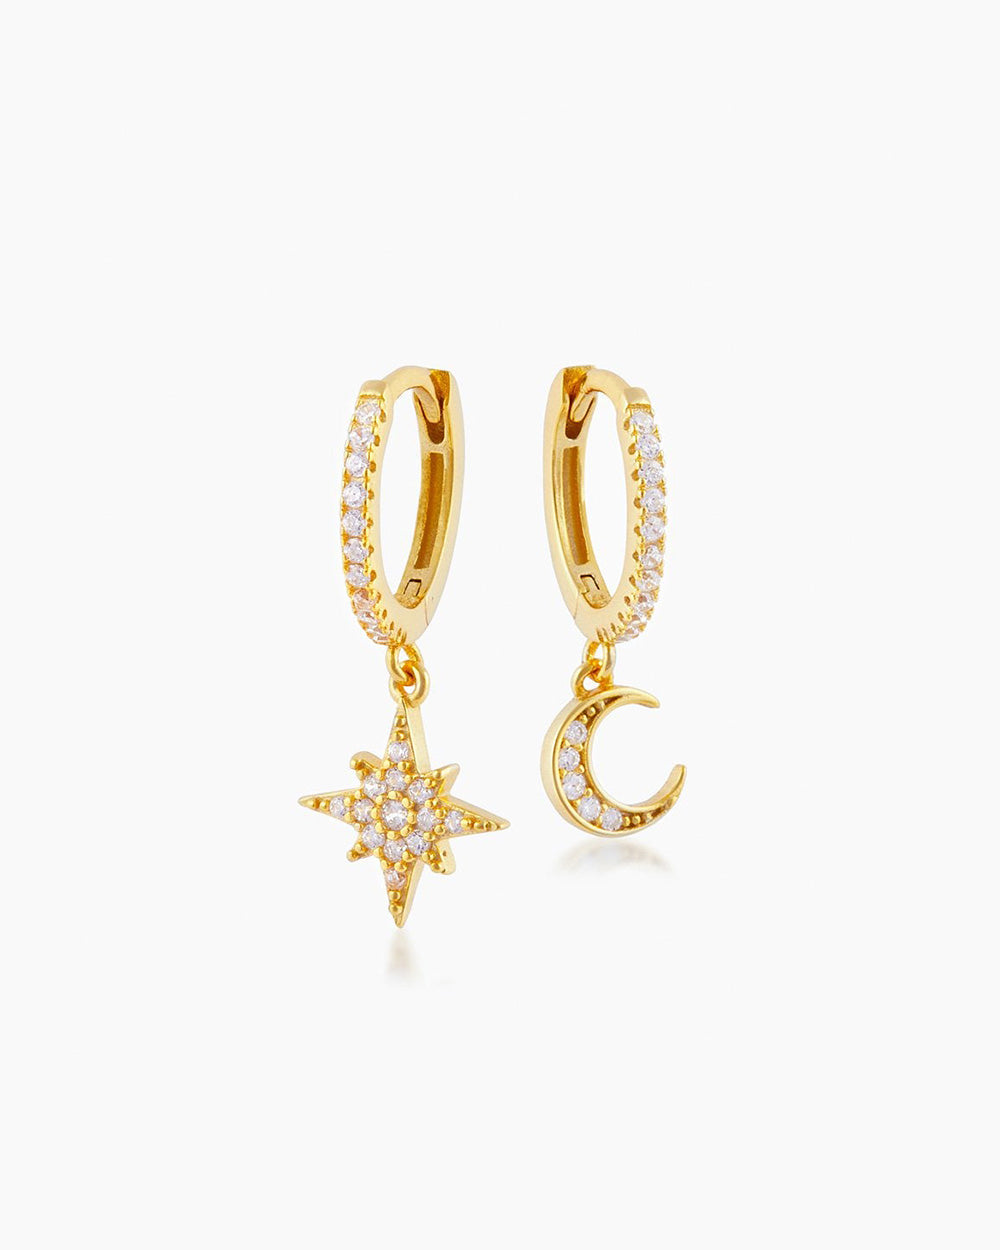 The Sky Huggies, gold drop earrings that feature star and moon charms on pavé-set ear-hugging hoops